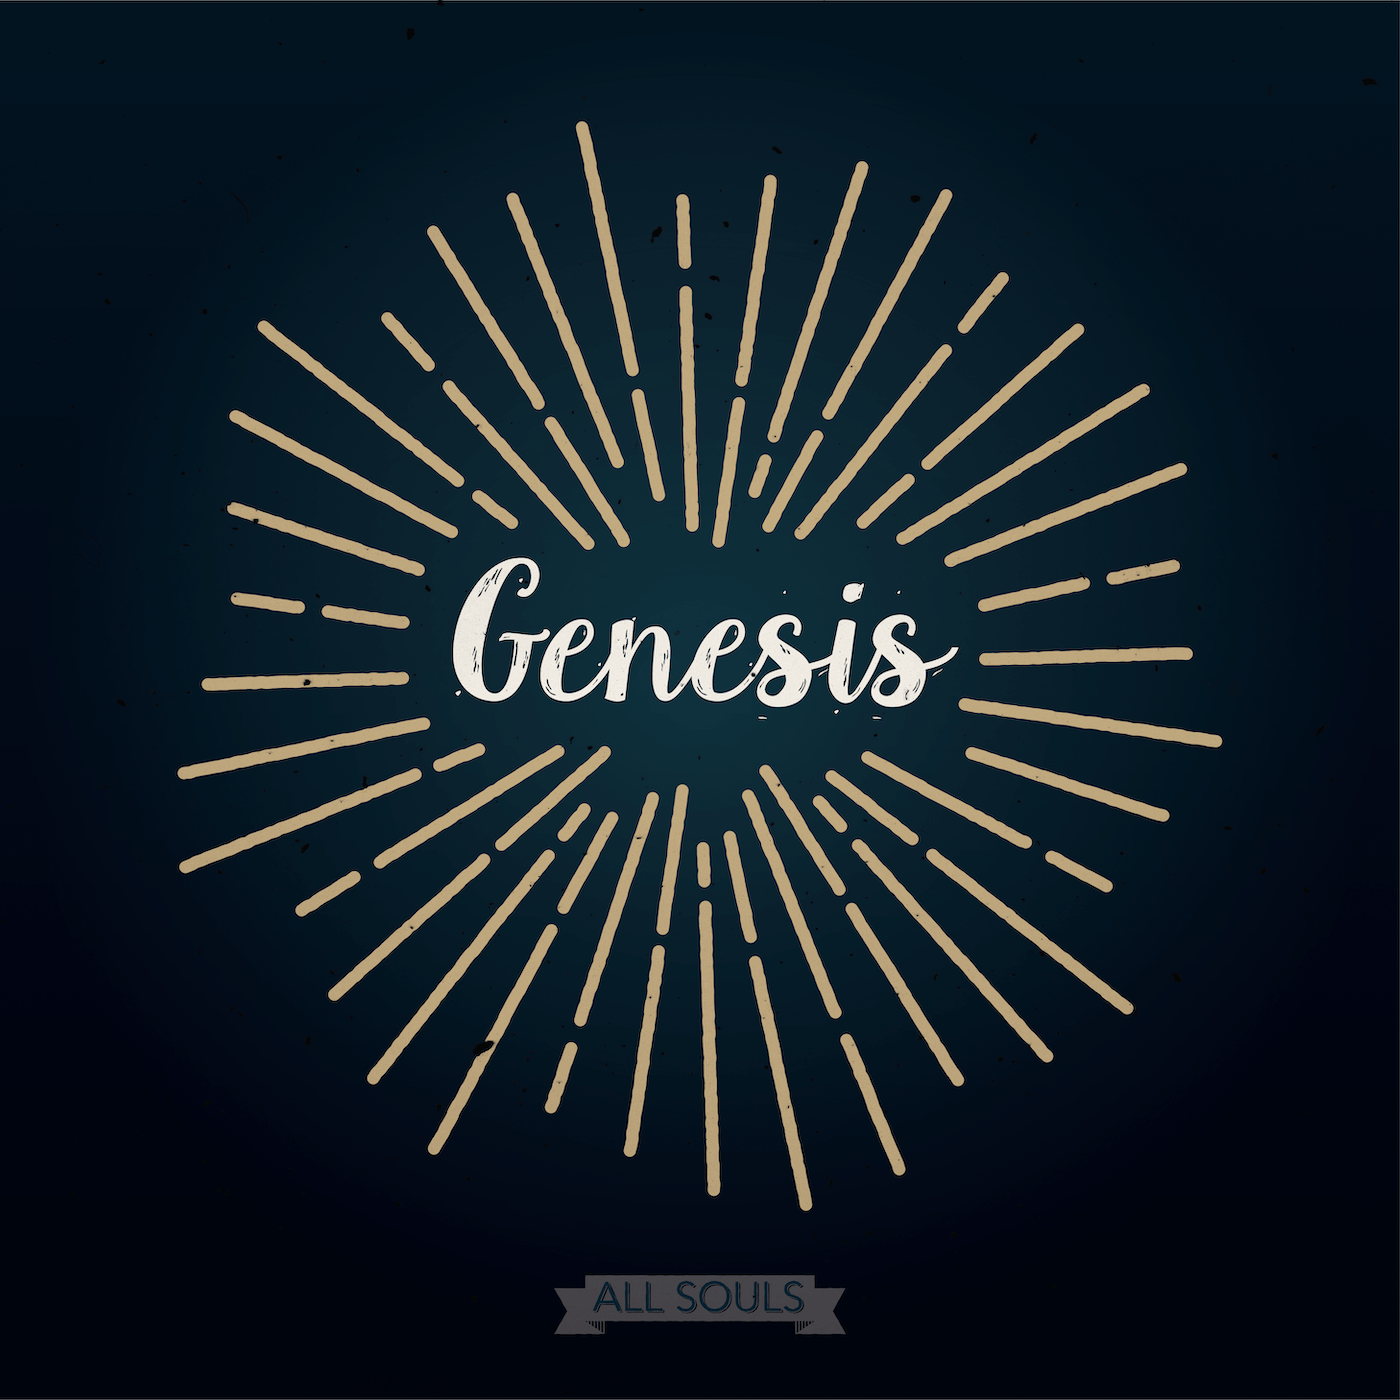 the word Genesis on a dark background with radiant lines